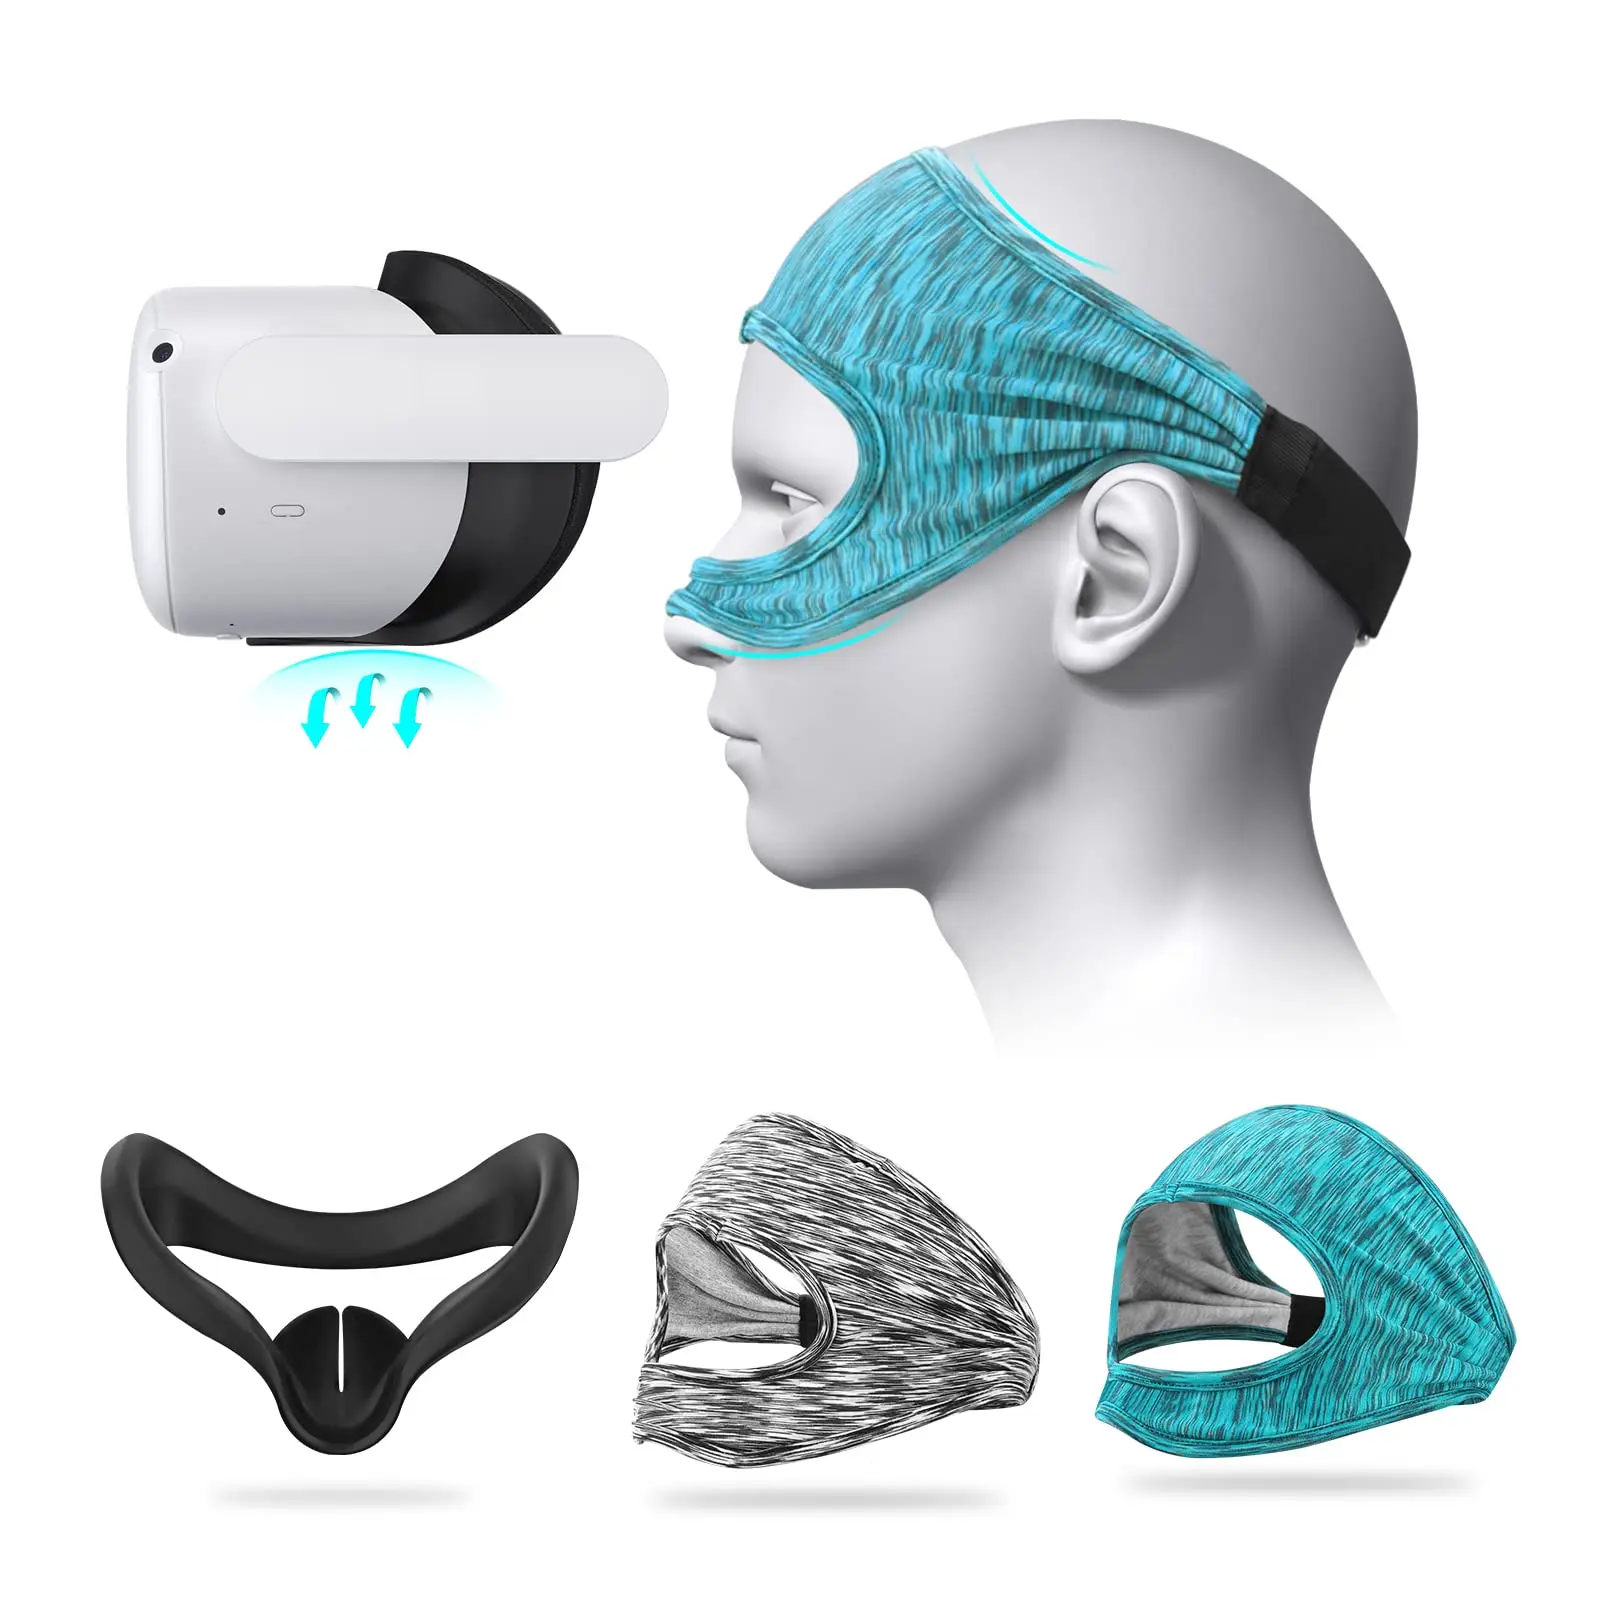 Vr Accessories Quest | Virtual Reality Accessories | Oculus Quest 2 Eye Mask Pc Vr - Aliexpress